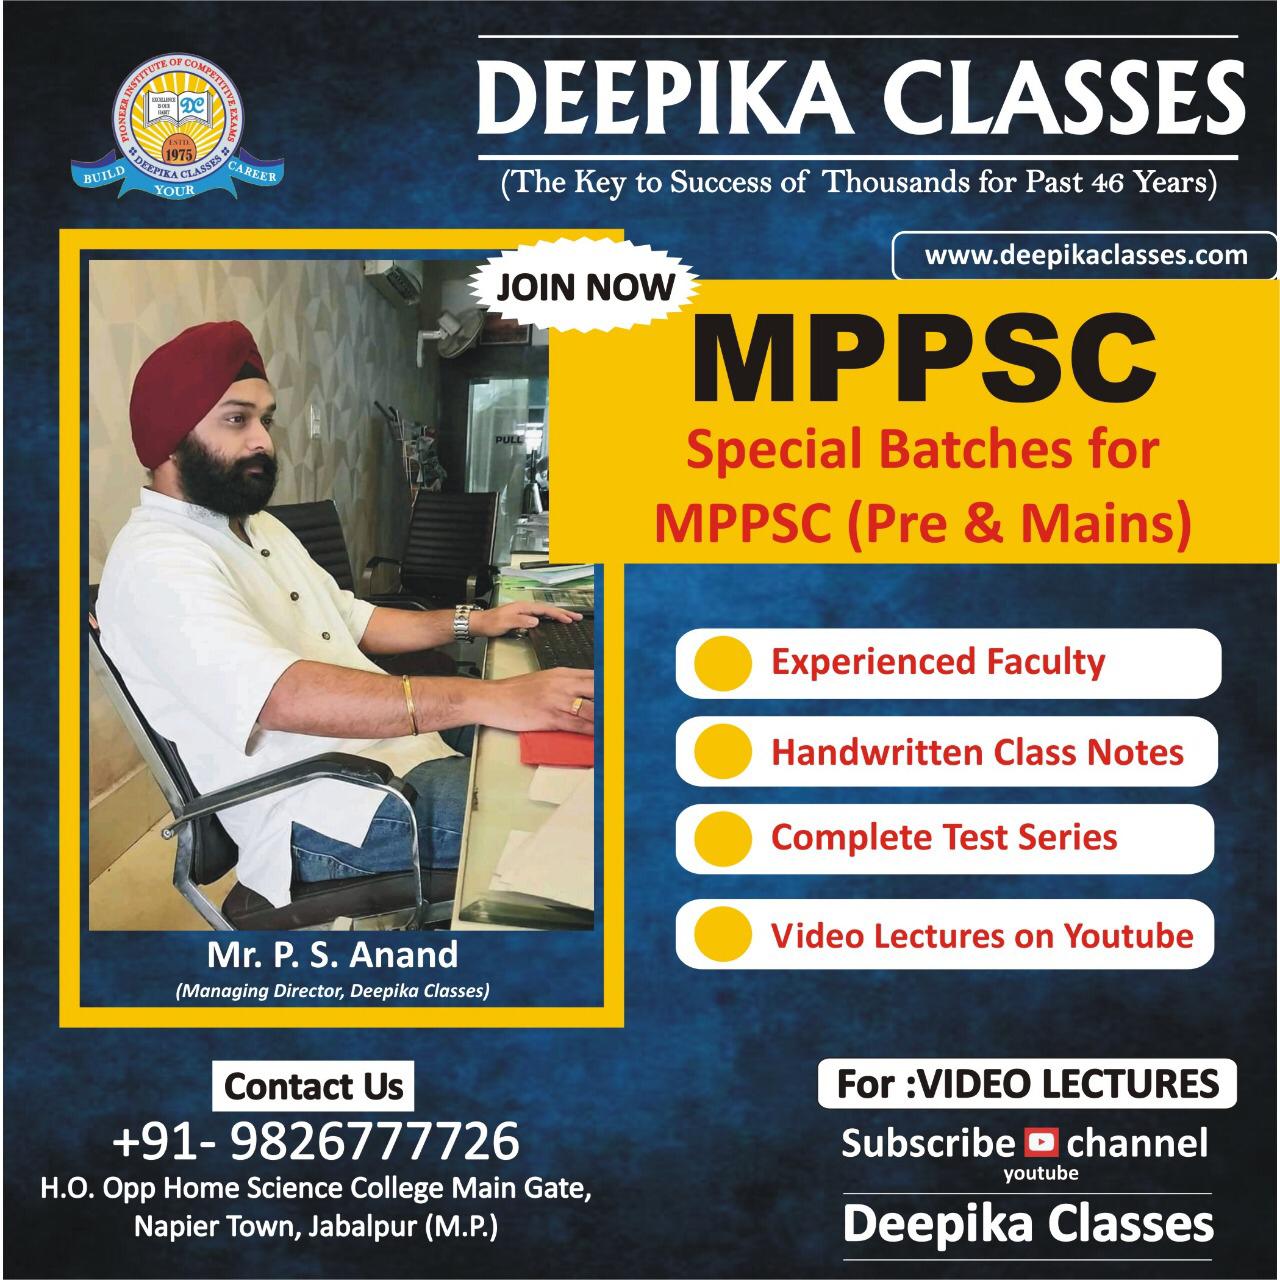 Why is the Madhya Pradesh Public Service Commission Civil Services Examination (MPPSC) considered one of the toughest exams? | Deepika Classes | MPPSC Classes in Jabalpur, MPPSC Coaching in Jabalpur, Top MPPSC Classes in Jabalpur, Best mppsc coaching classes in Jabalpur, MPPSC coaching institute in Jabalpur, MPPSC  Classes near me in Jabalpur - GL111128